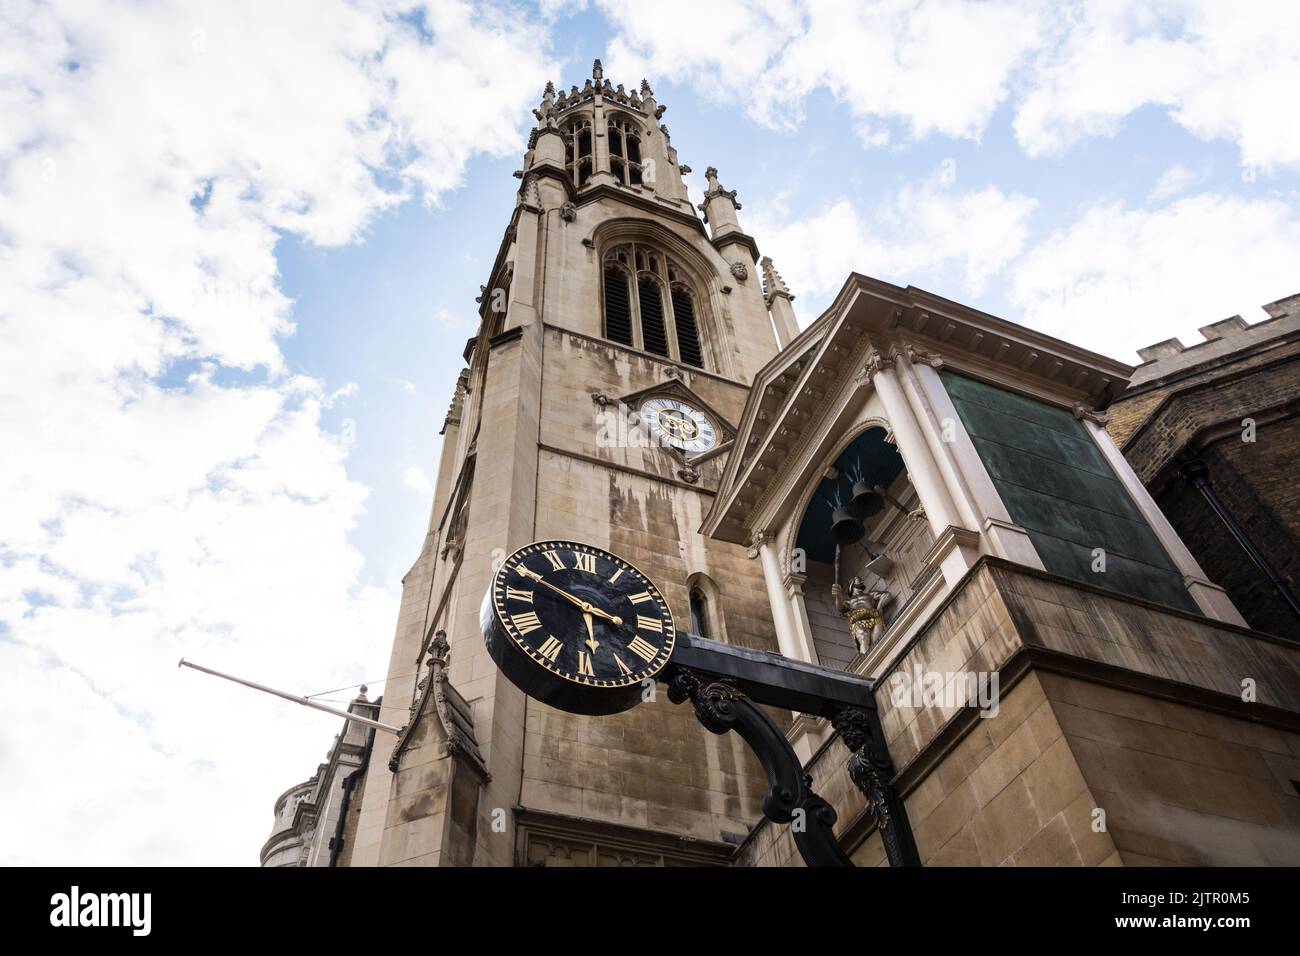 The steeple, The Clock and Giants of St Dunstan-in-the-West church on Fleet Street, London, England, UK. Stock Photo